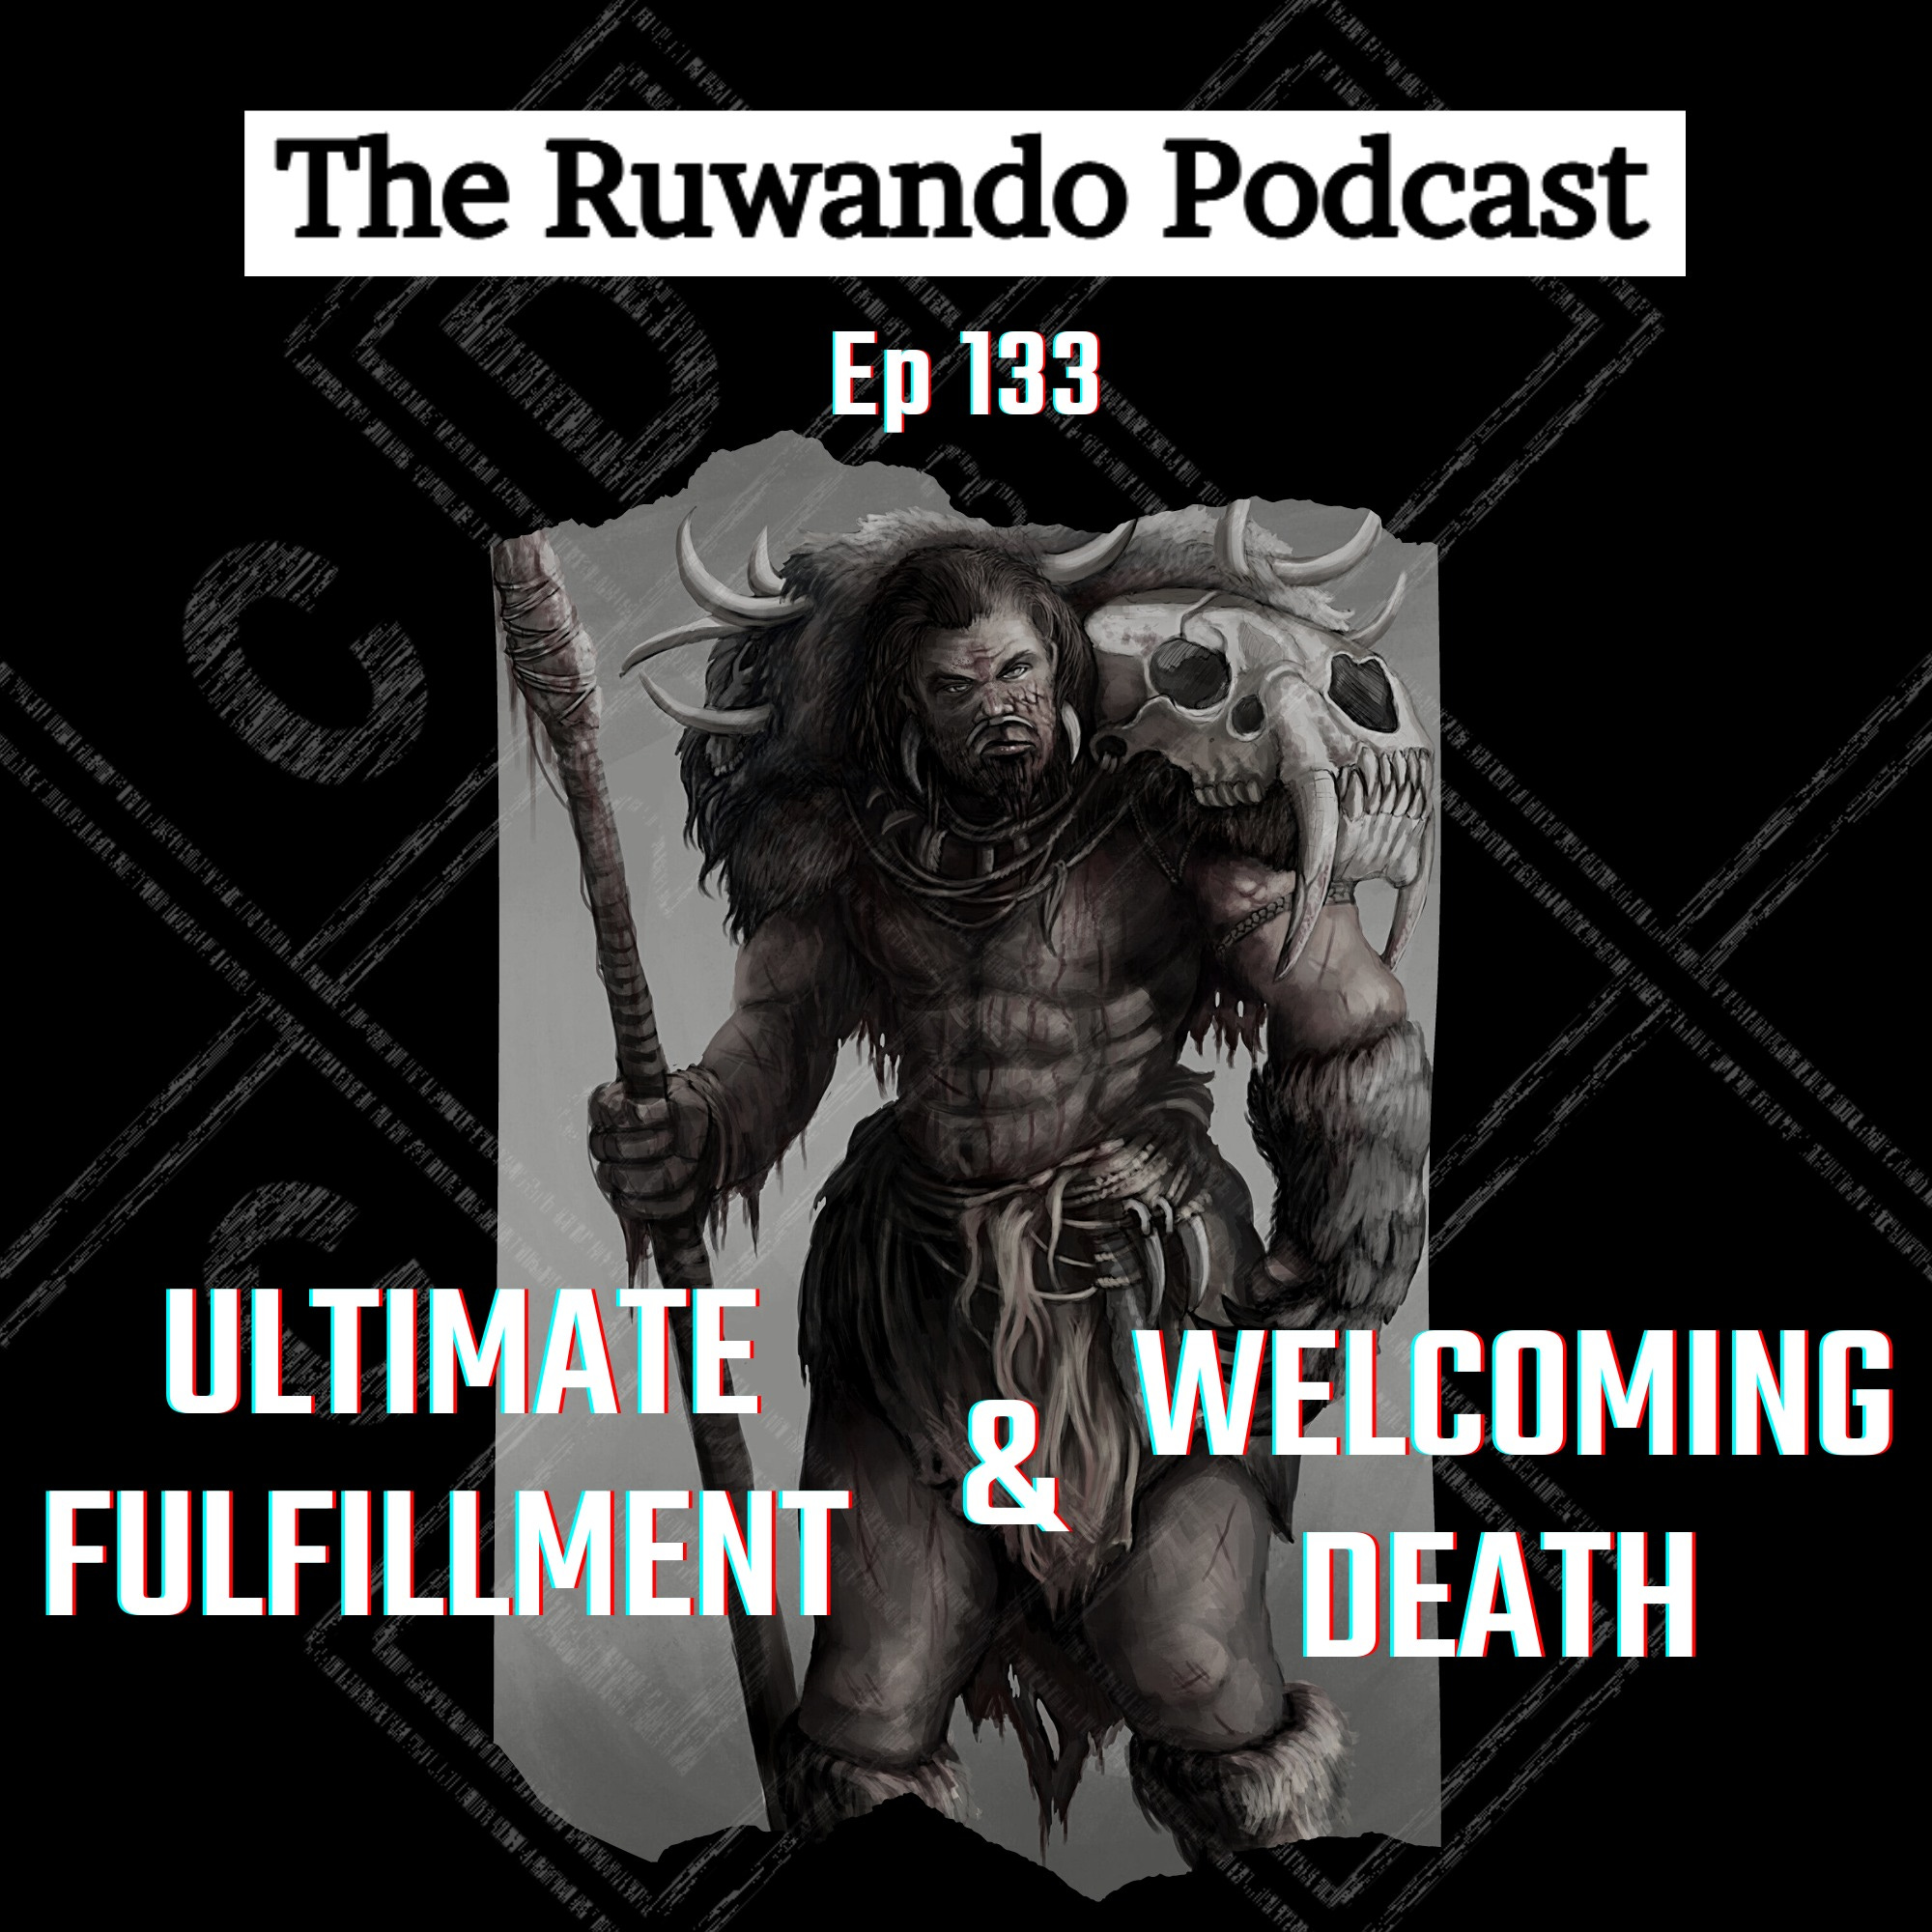 133 - Ultimate Fulfillment & Welcoming Death